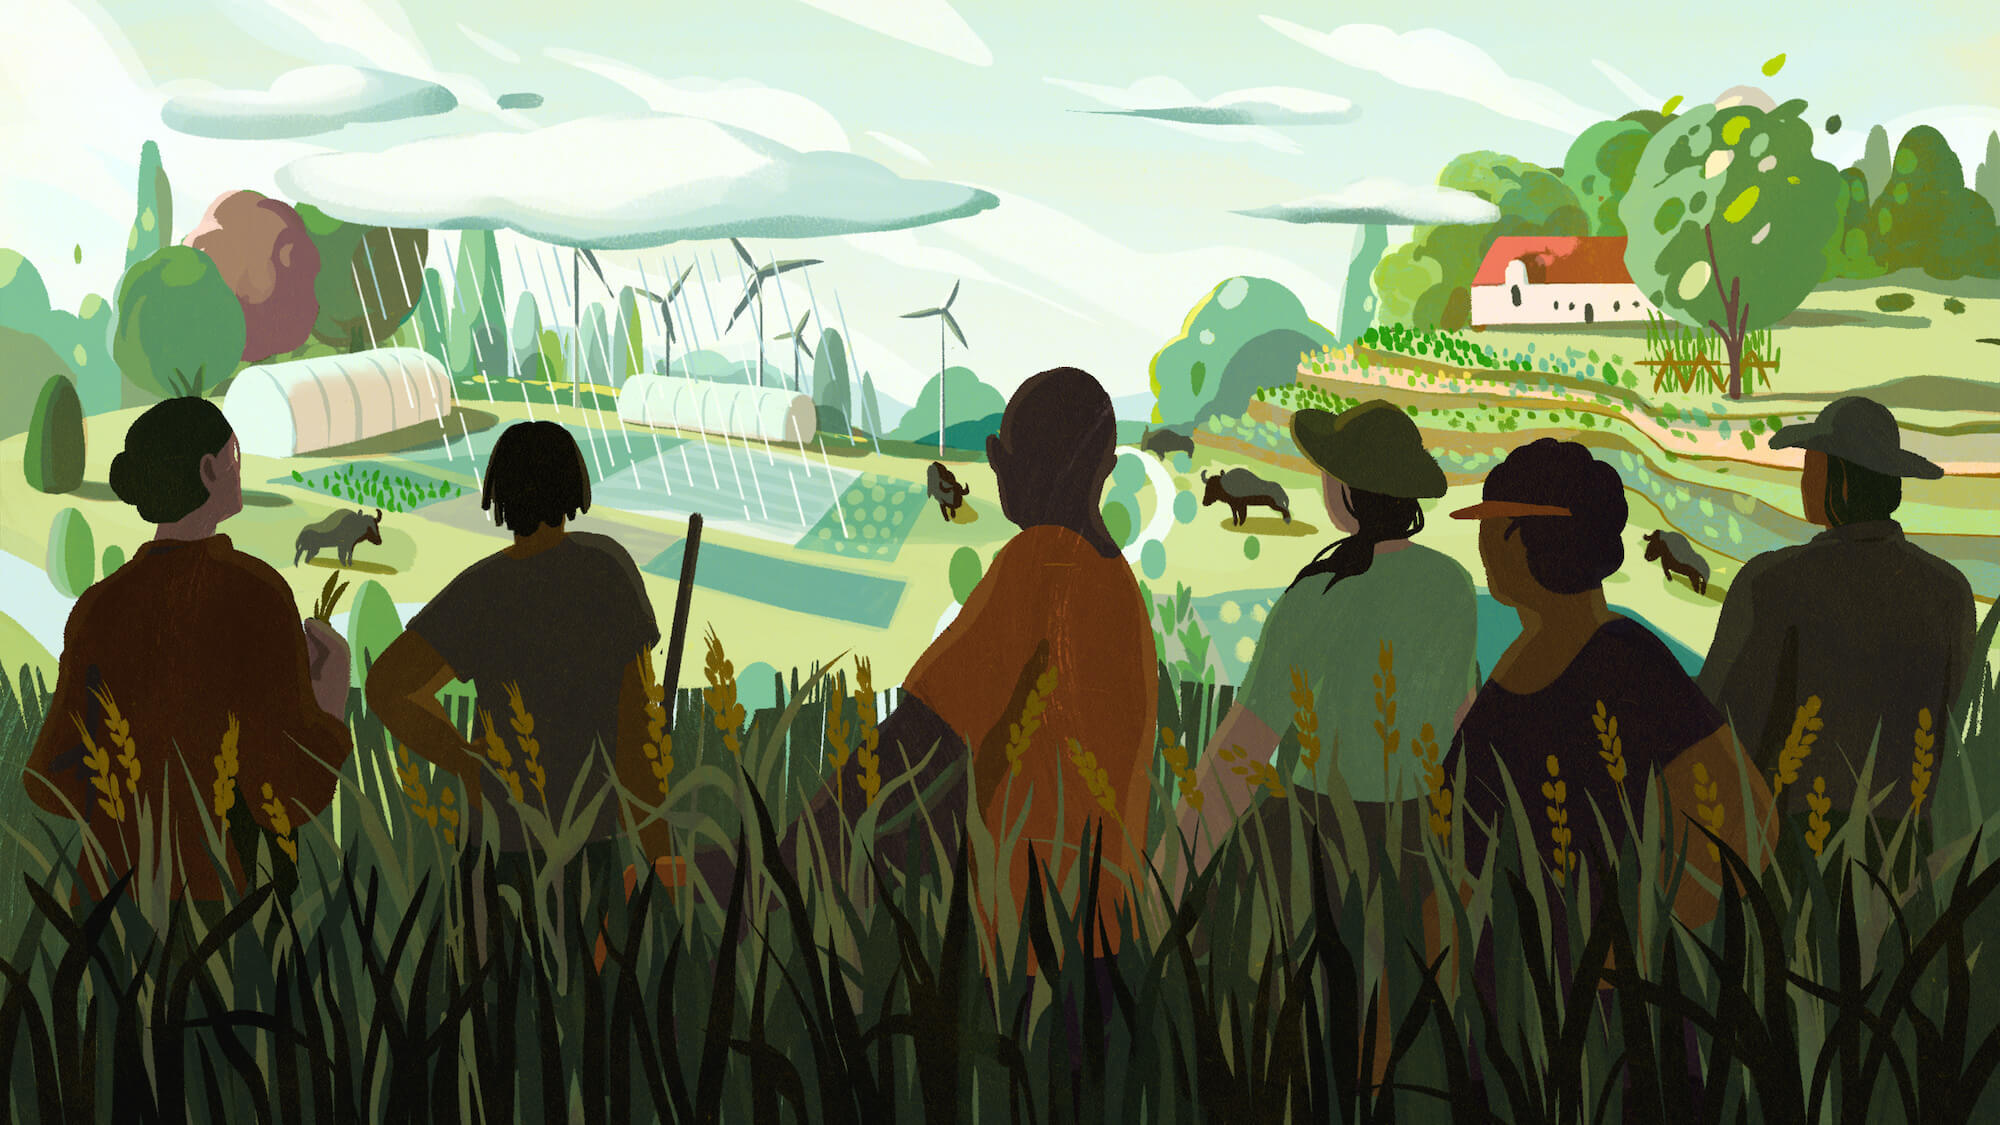 Illustration: Regenerative agriculture needs to reckon with racial justice, land access, equity and other issues before it can fight climate change